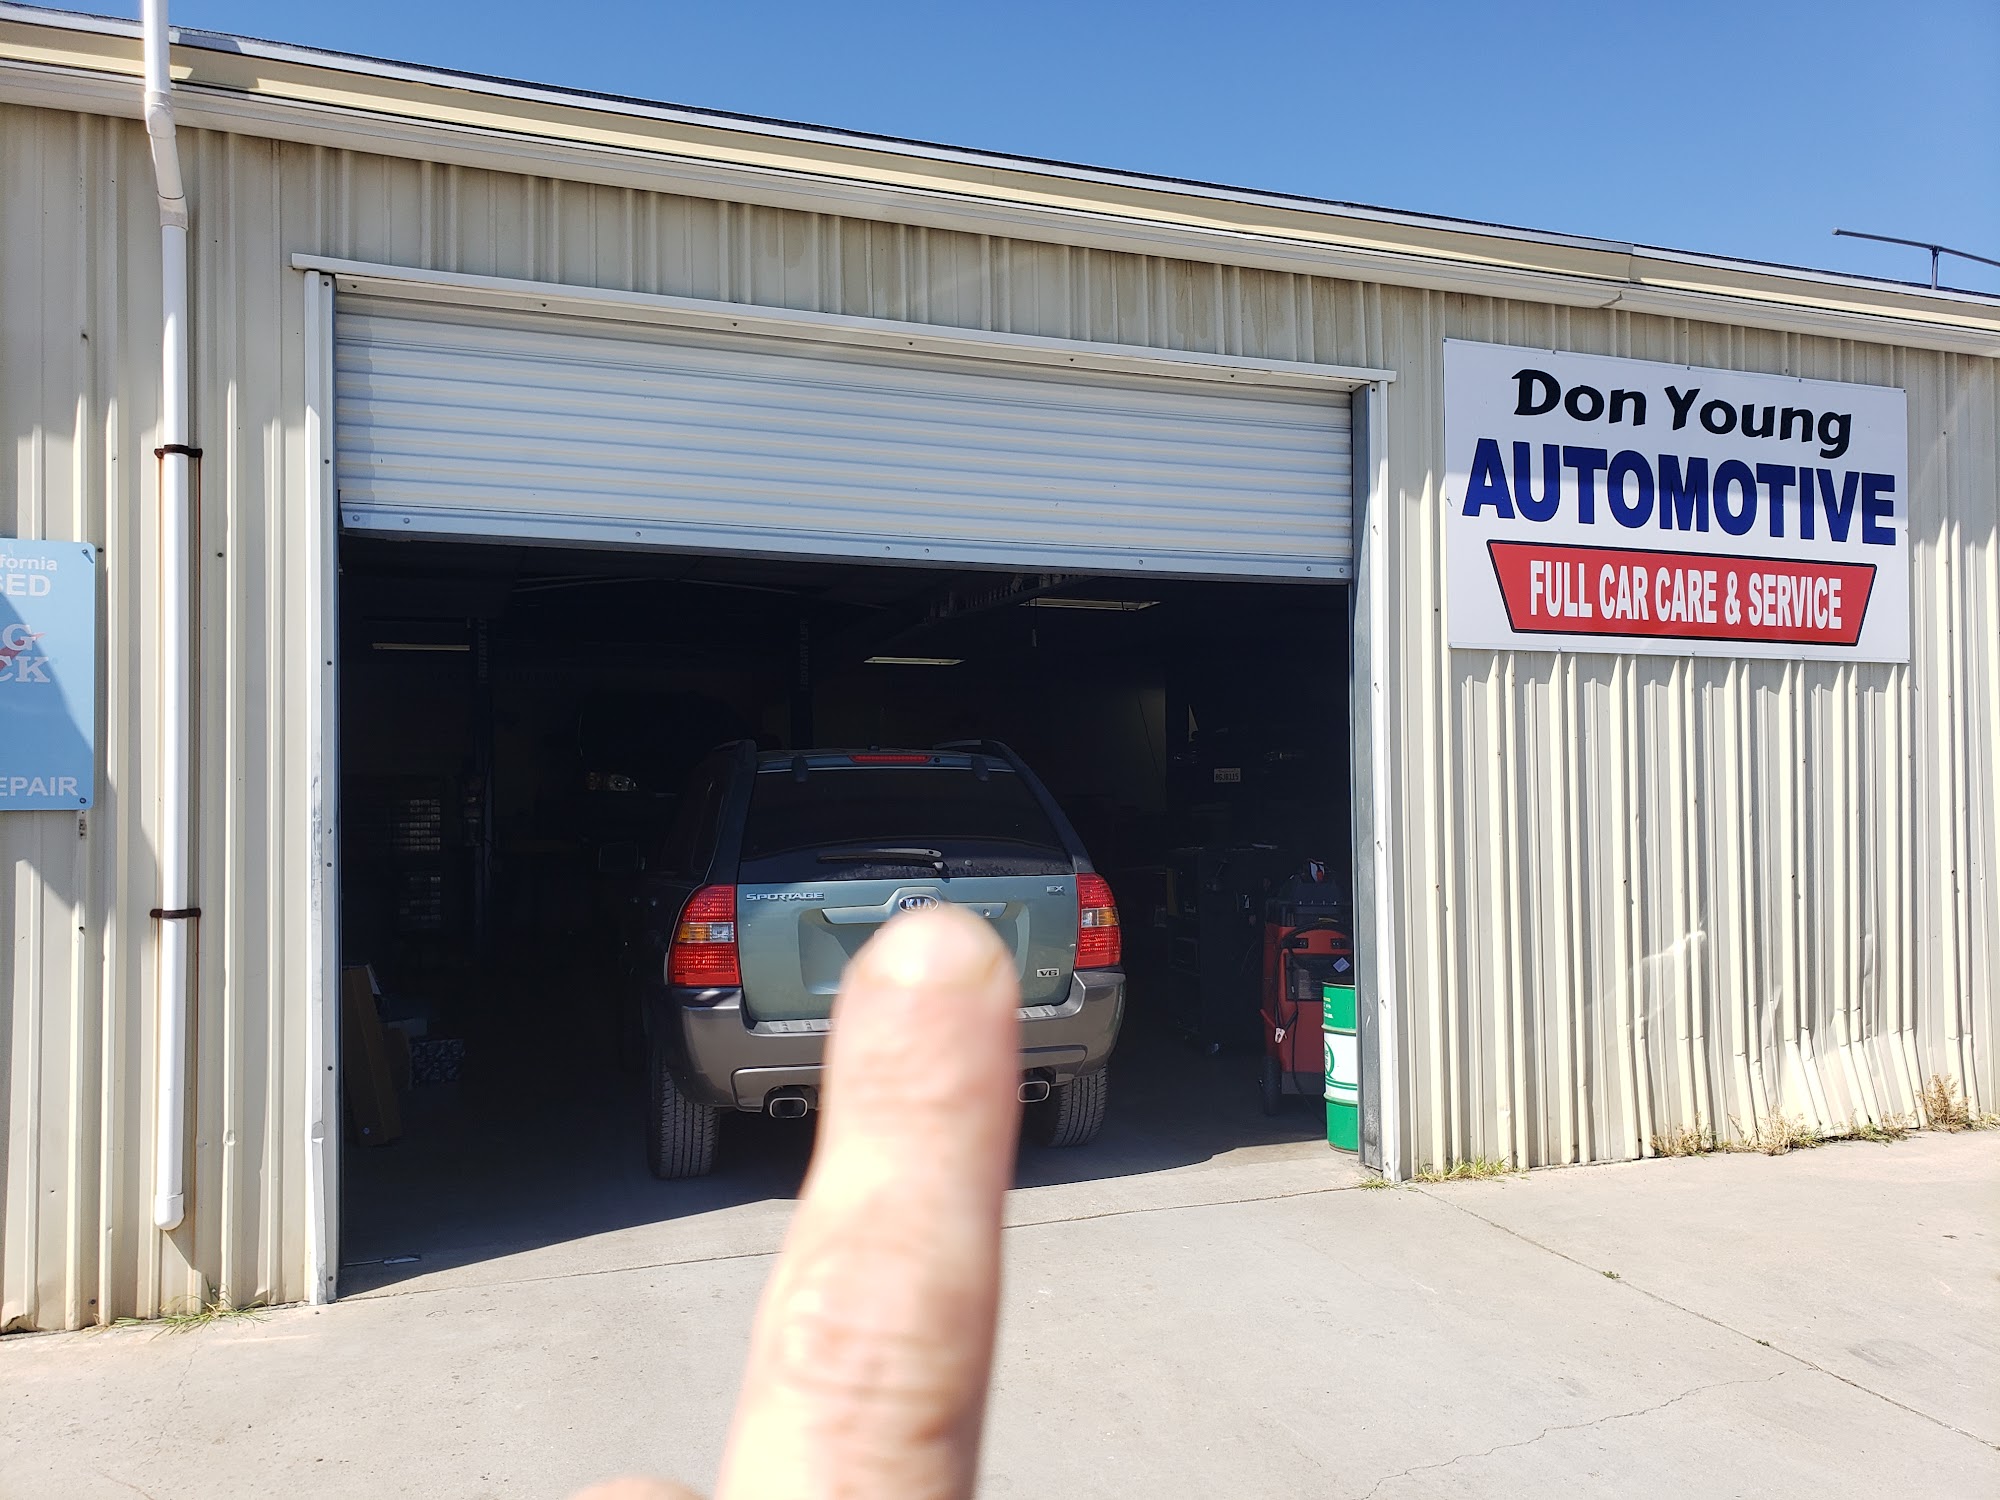 Don Young Automotive